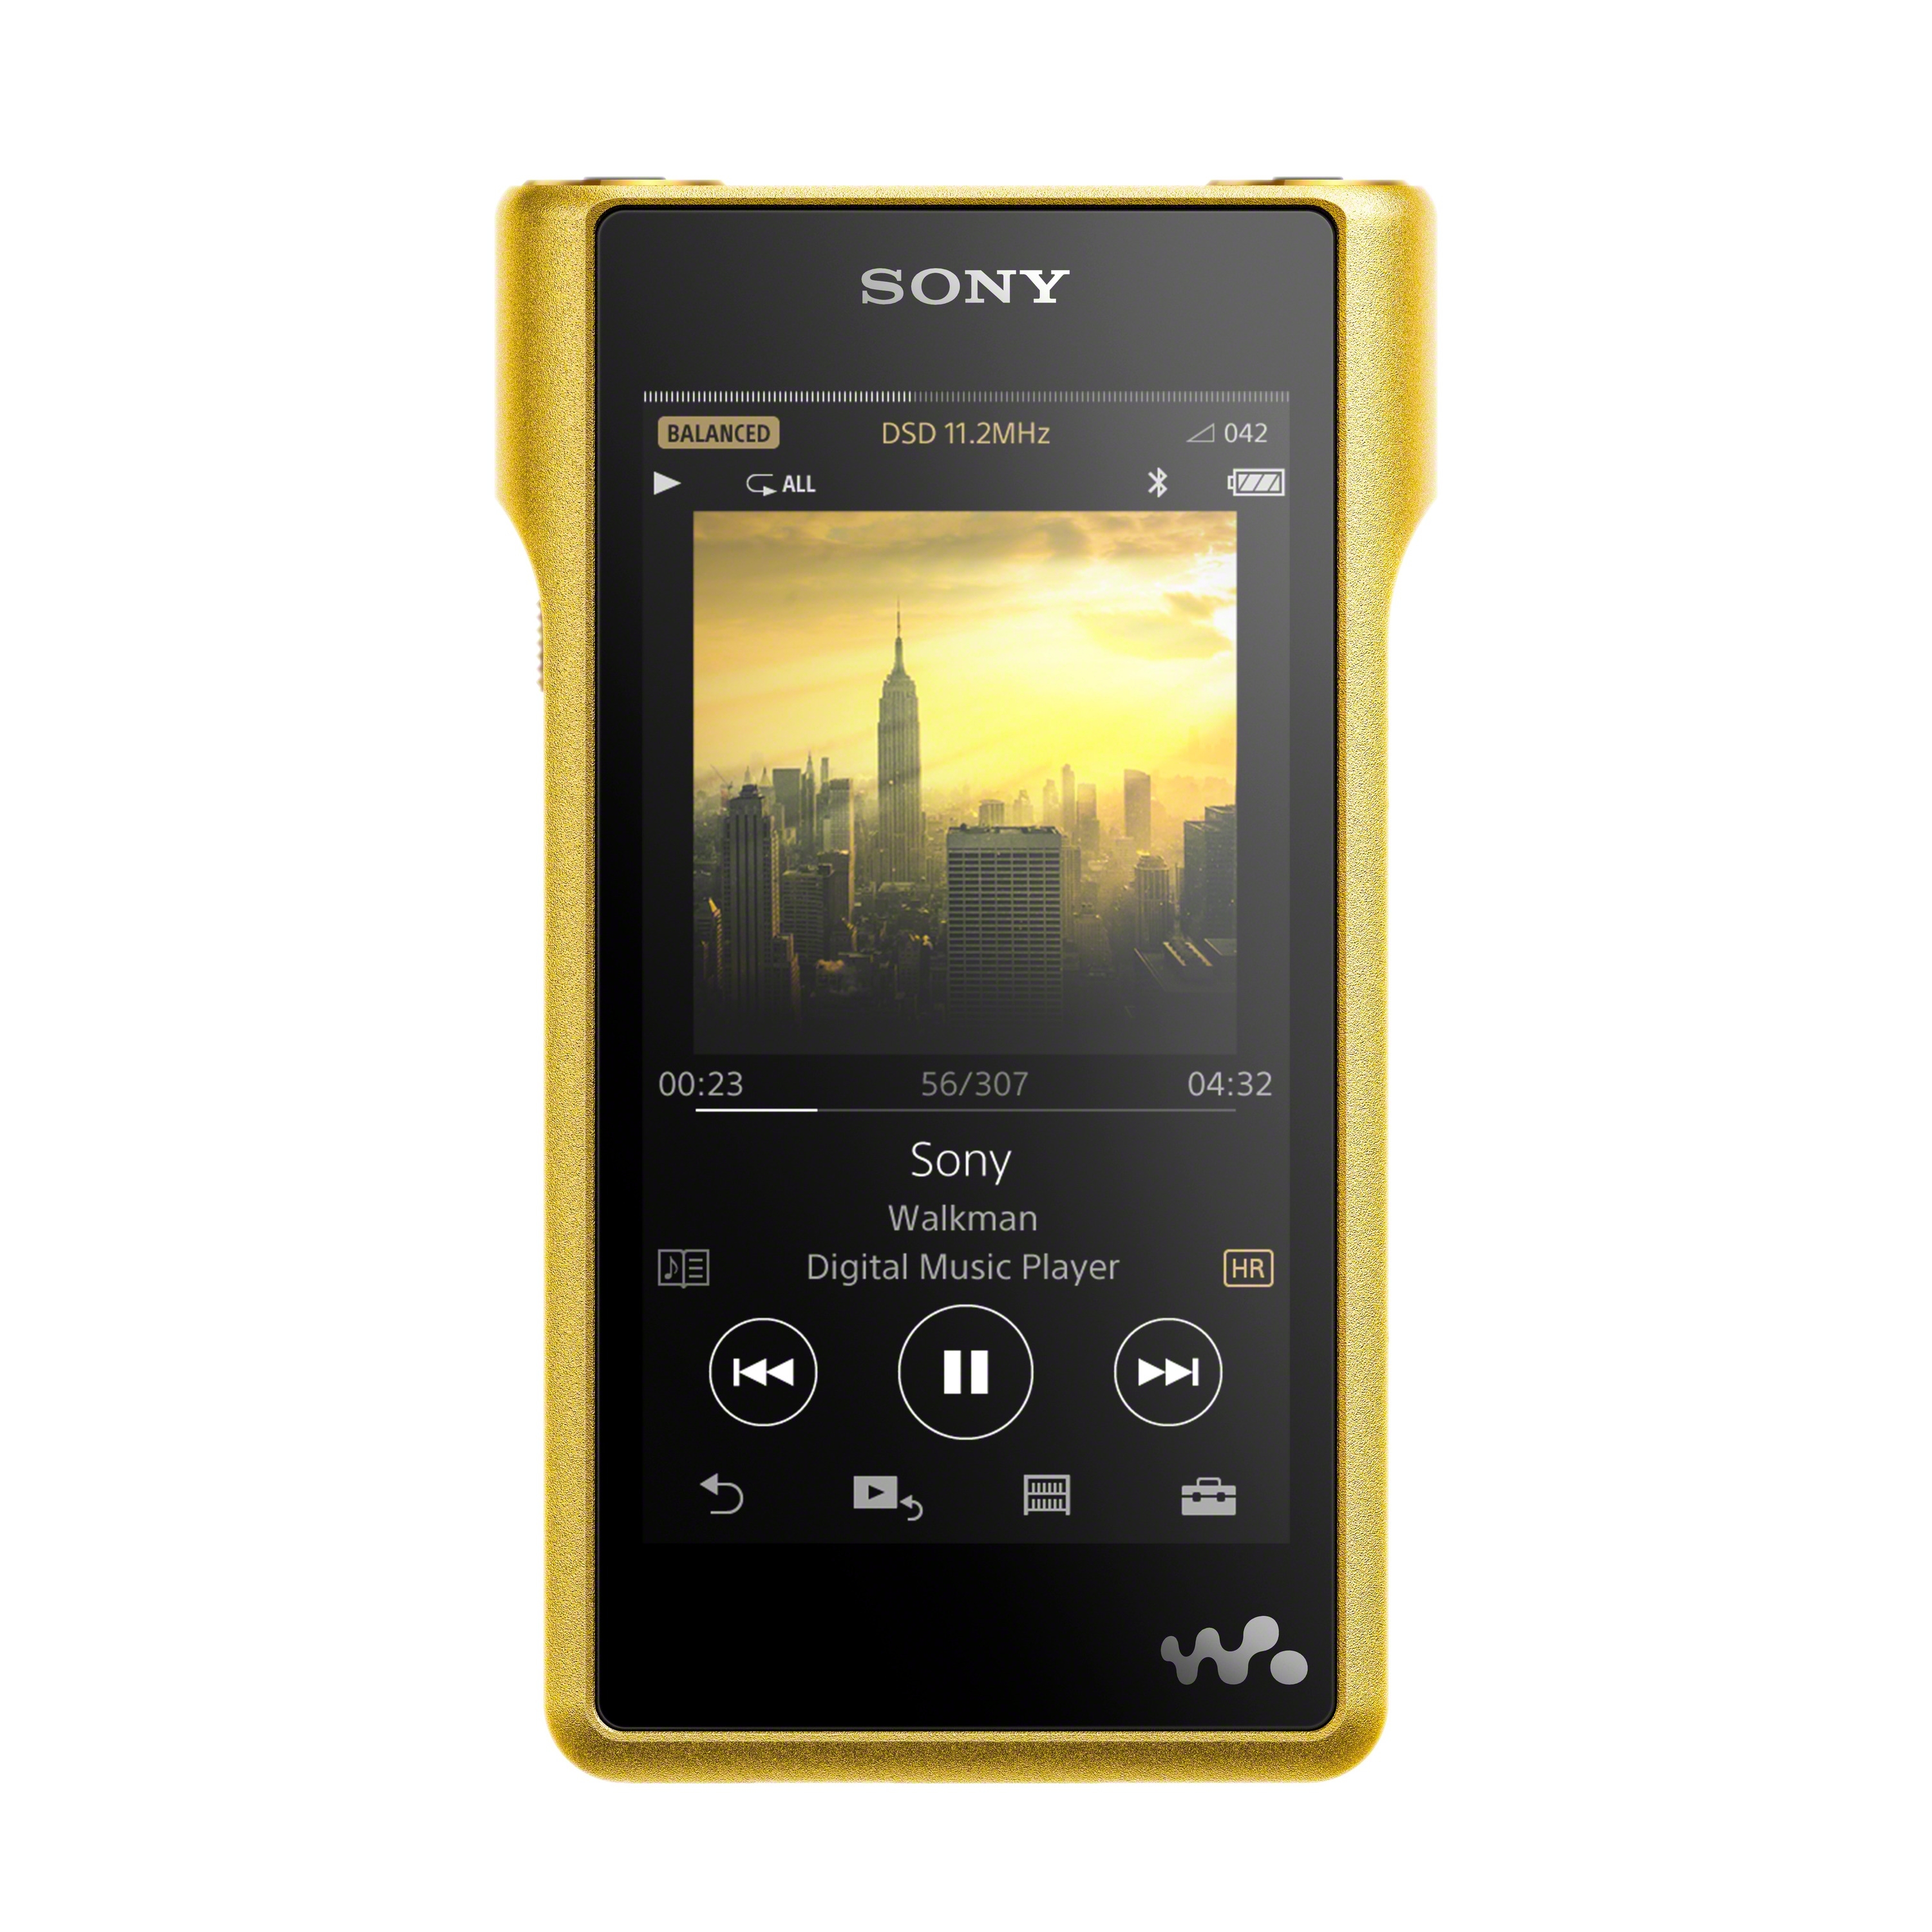 14 Facts for The Sony Walkman's 40th Anniversary – SURFACE